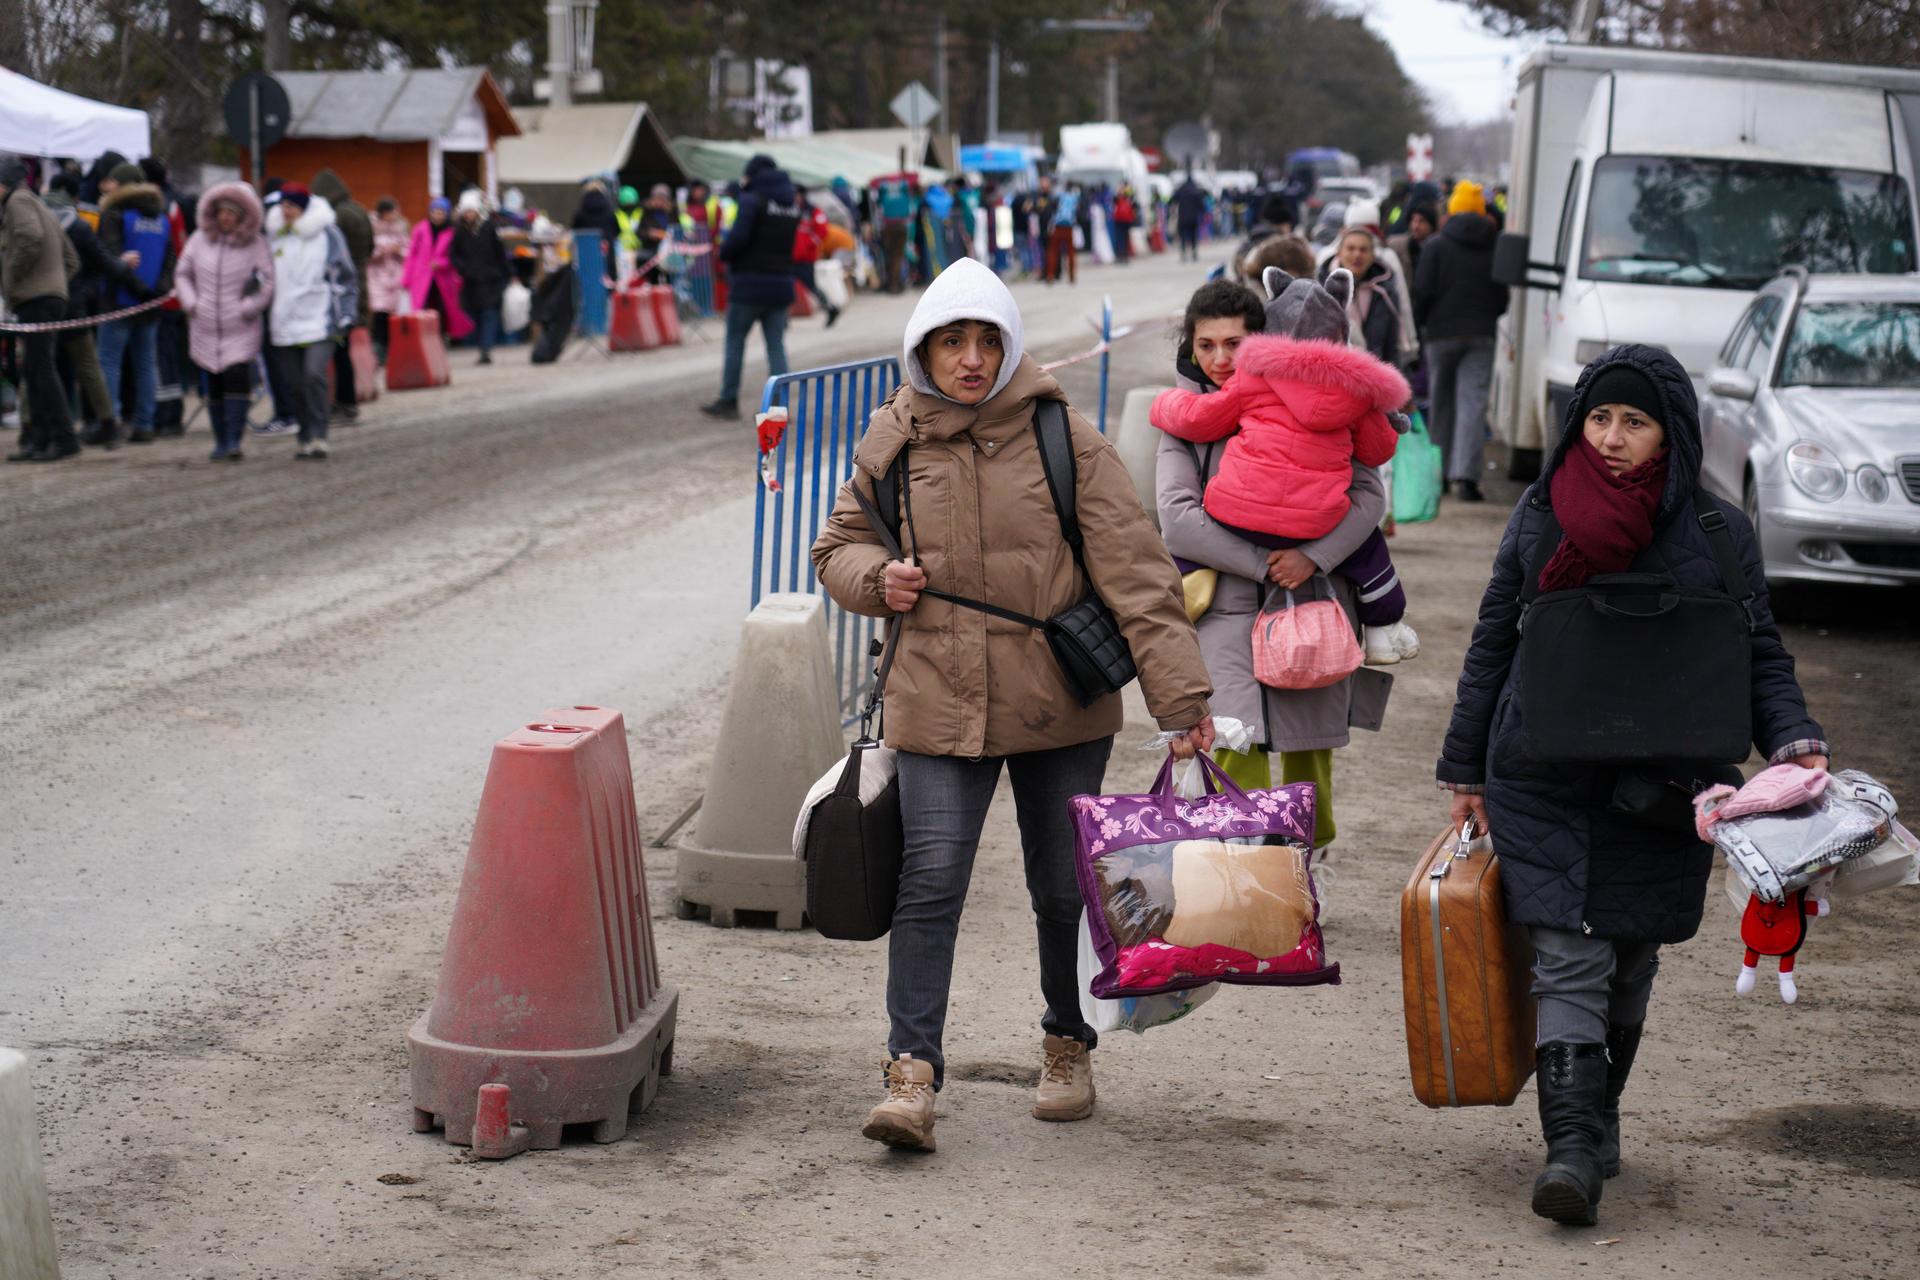 Ukrainian refugees arrive across the border to Siret customs at the crossing point near the town of Suceava, in northern Romania.